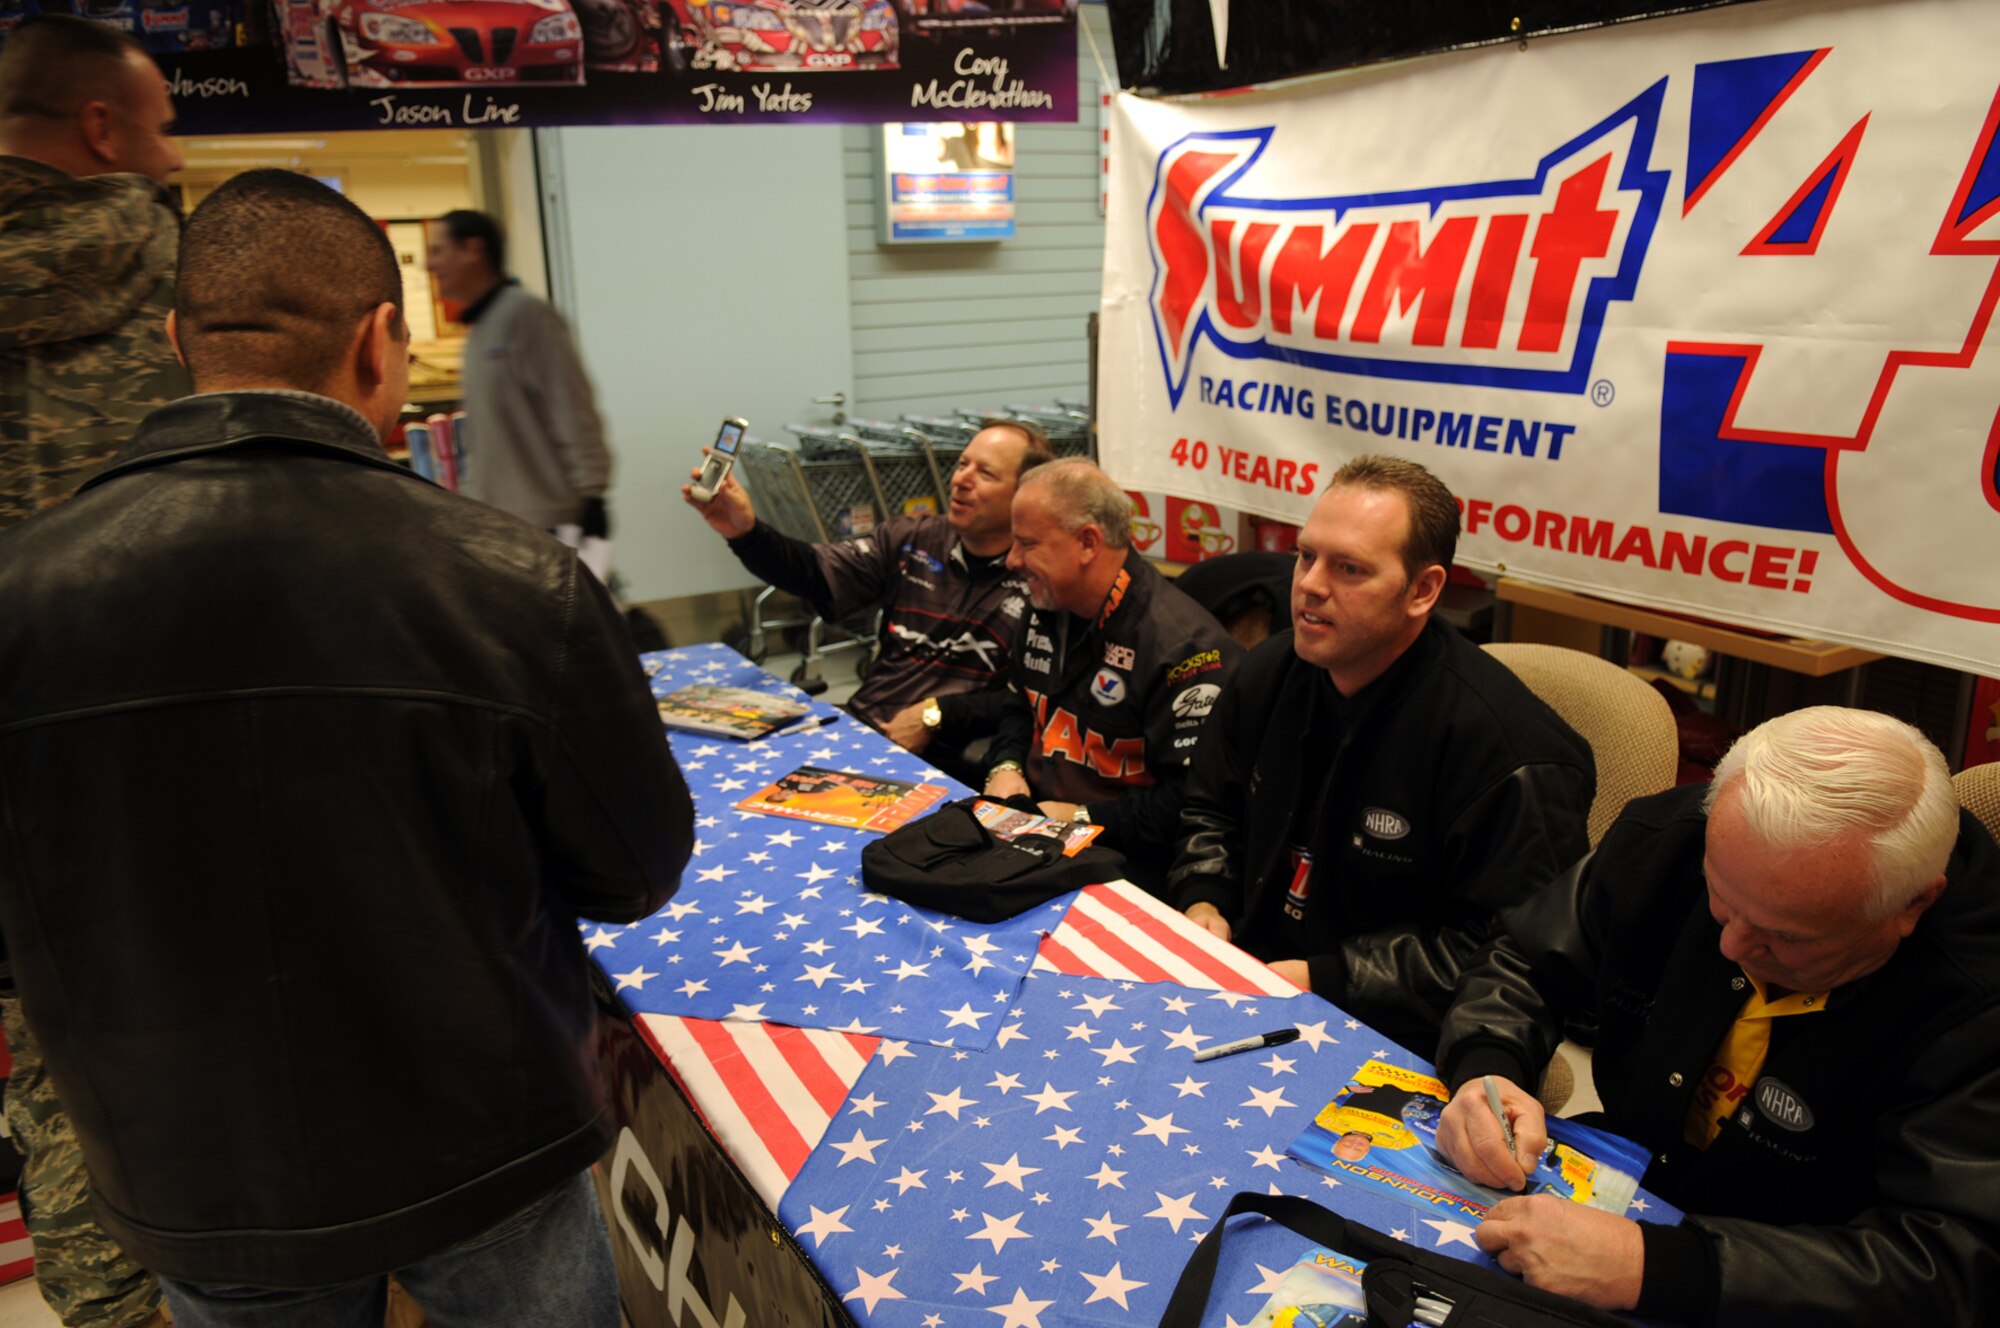 Four drivers from the National Hot Rod Association sign autographs and talk to servicemembers at the Vogelweh Base Exchange, during a USO sponsored trip, Ramstein Air Base, Germany, Nov. 25, 2008. The drivers are on the second leg of their trip after coming from Kuwait to visit American service members early that morning. (Airman 1st Class Scott Saldukas)